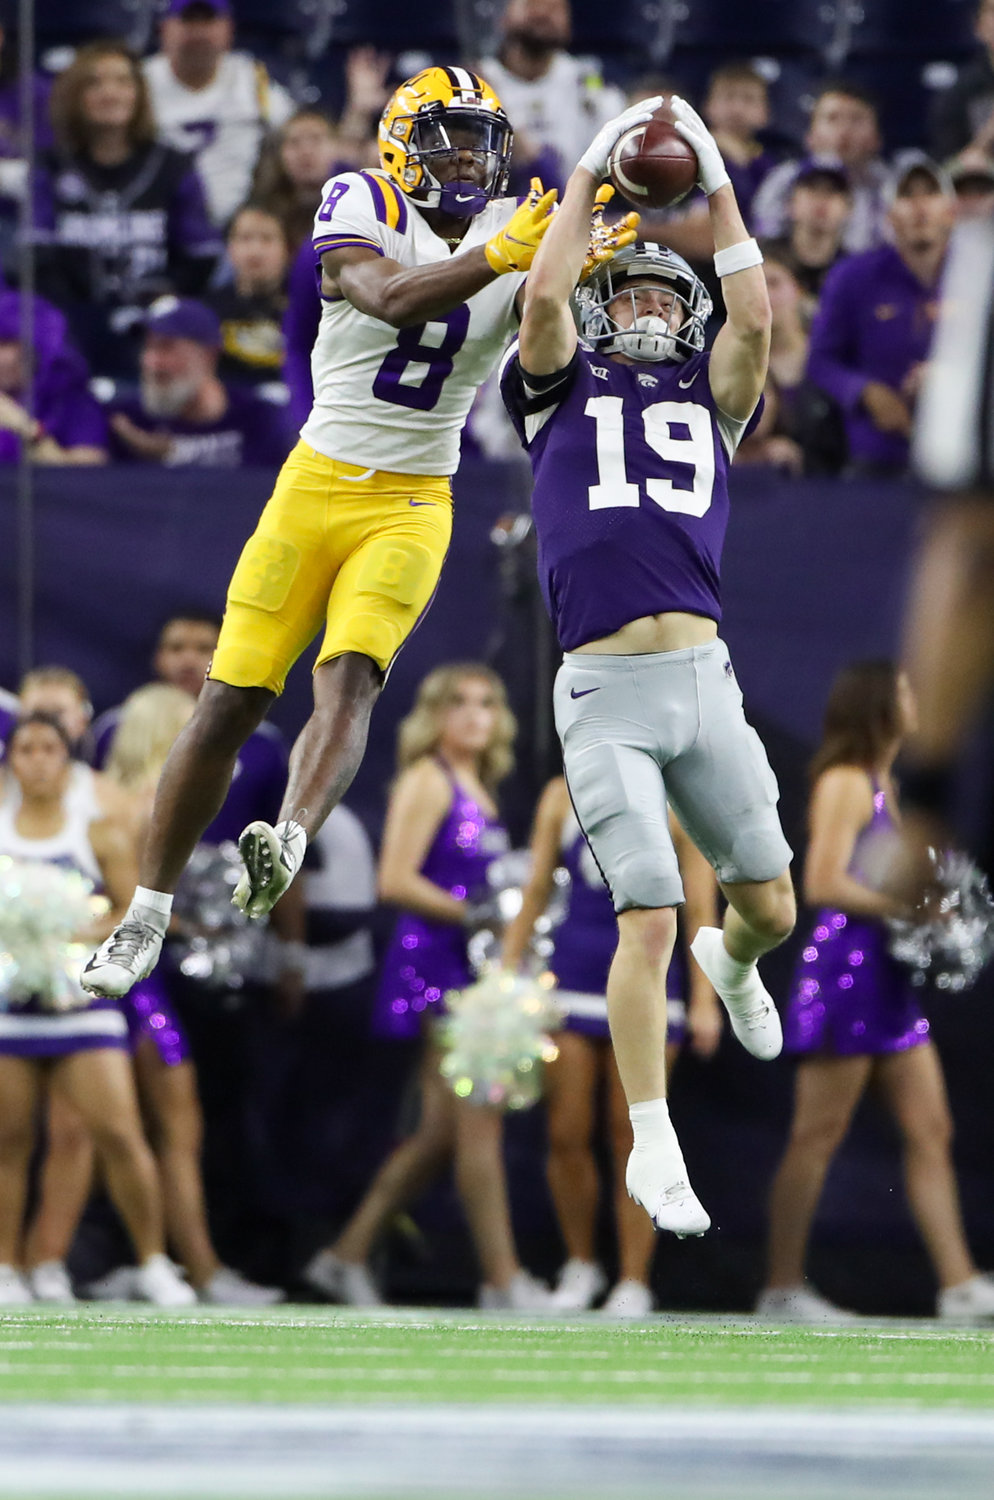 Kansas State Wildcats defensive back Ross Elder (19) intercepts a pass intended for LSU Tigers wide receiver Malik Nabers (8) during the TaxAct Texas Bowl on Jan. 4, 2022 in Houston, Texas.